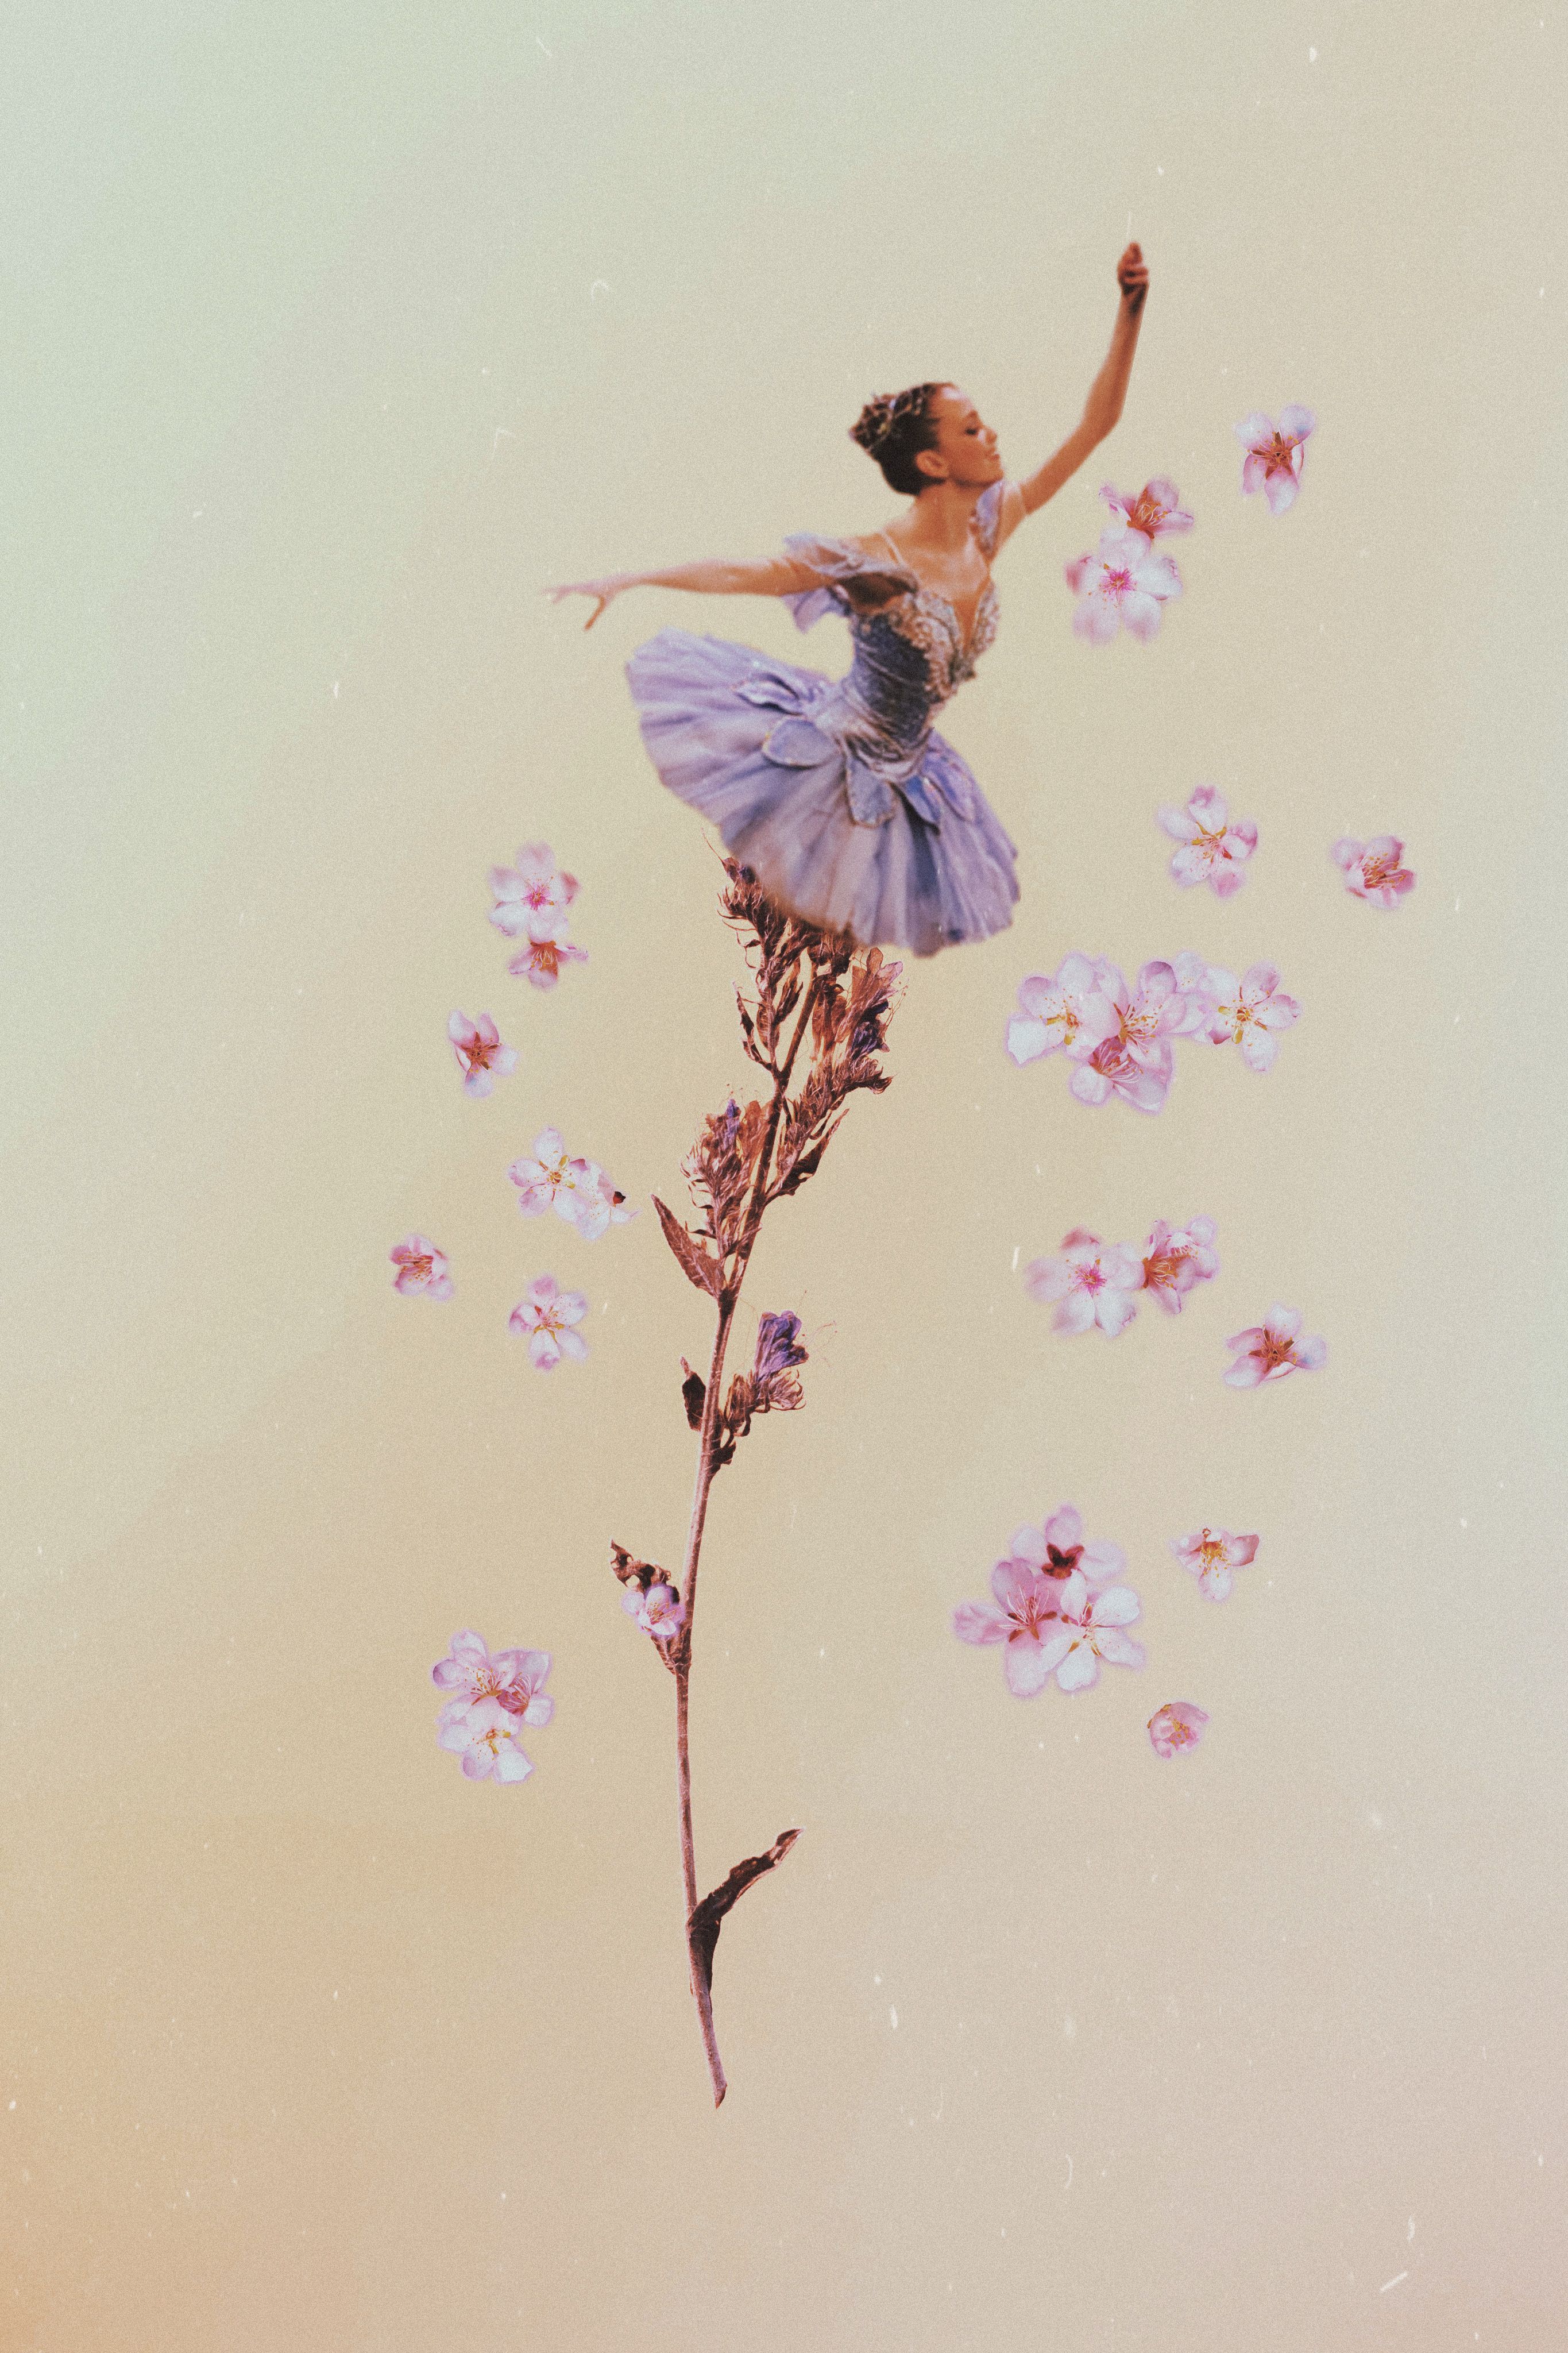 A woman in ballet shoes is flying through flowers - Ballet